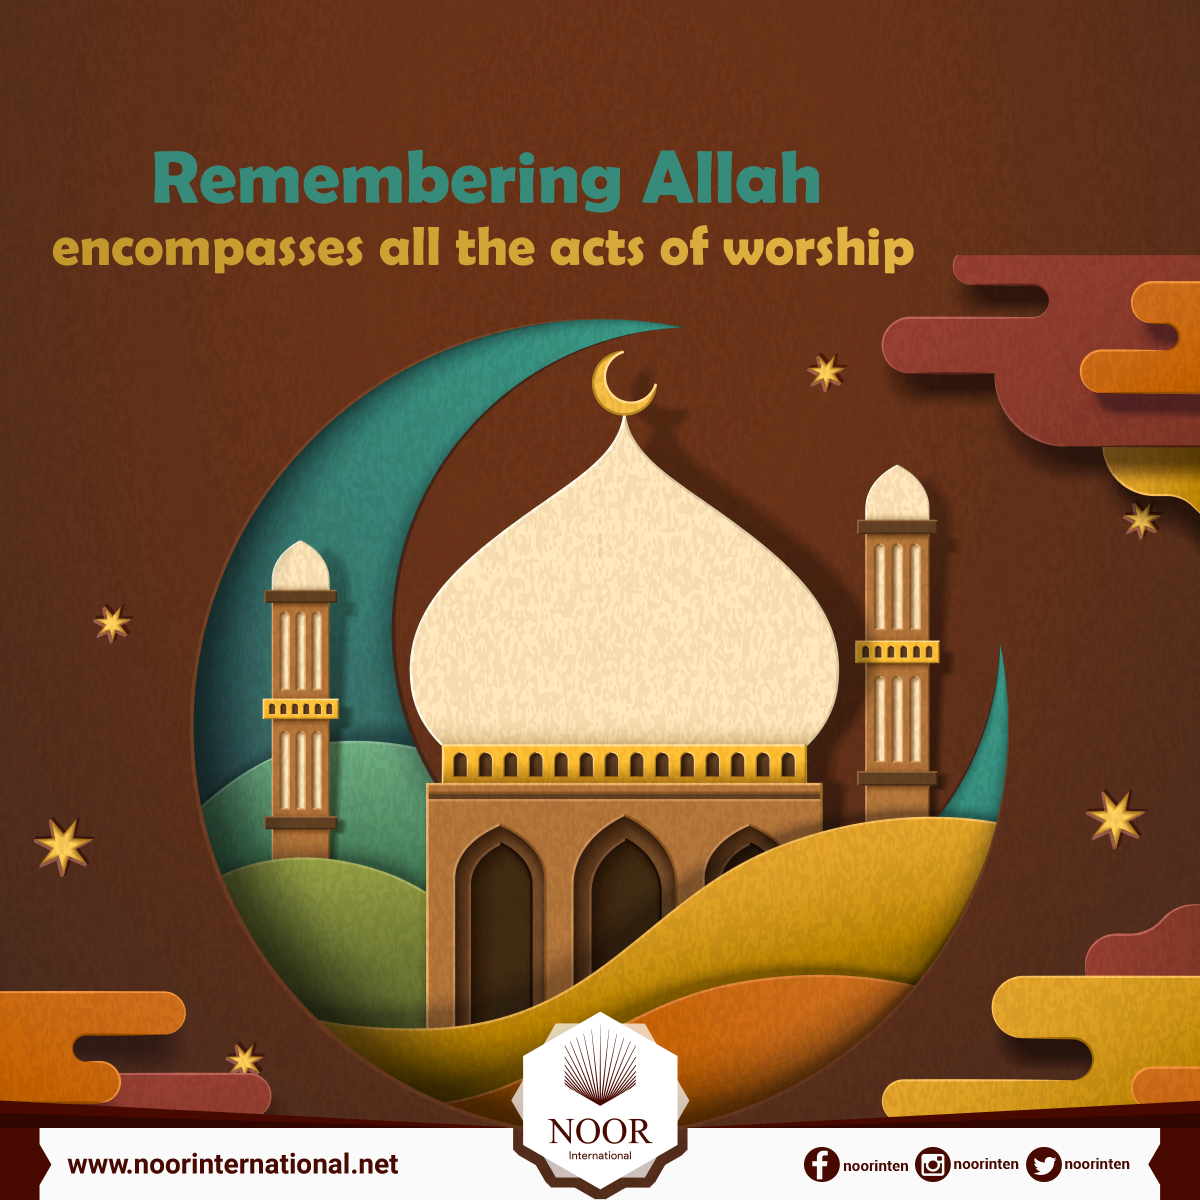 Remembering Allah encompasses all the acts of worship